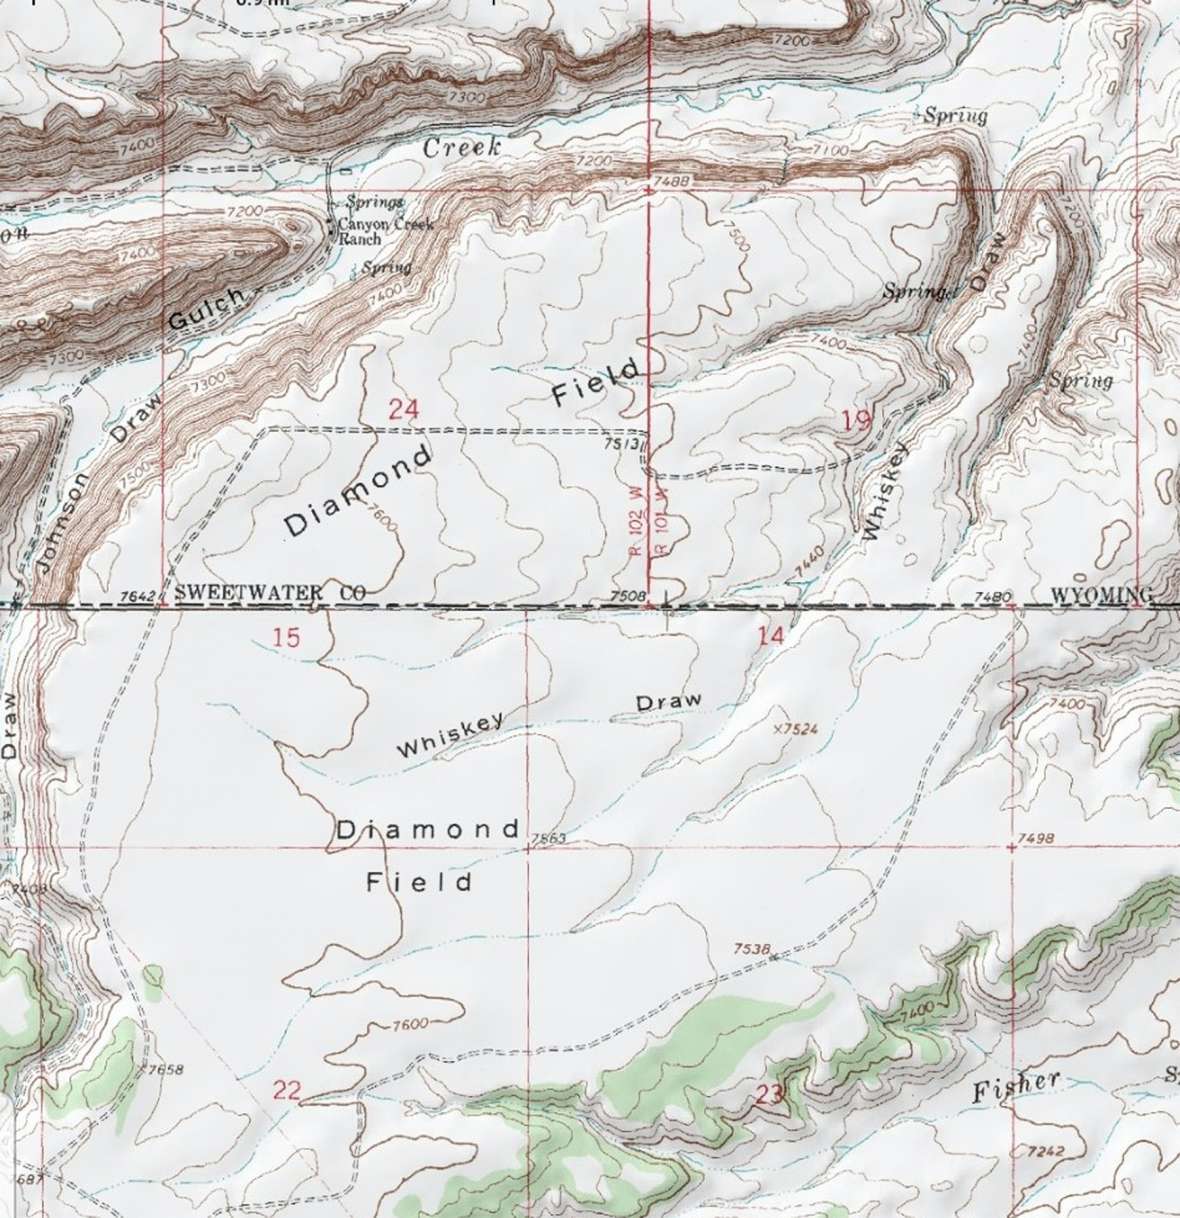 Ground zero of the Great Diamond Hoax is still marked today as “Diamond Field” on U.S. Geological Survey maps. There are no diamonds there. USGS.